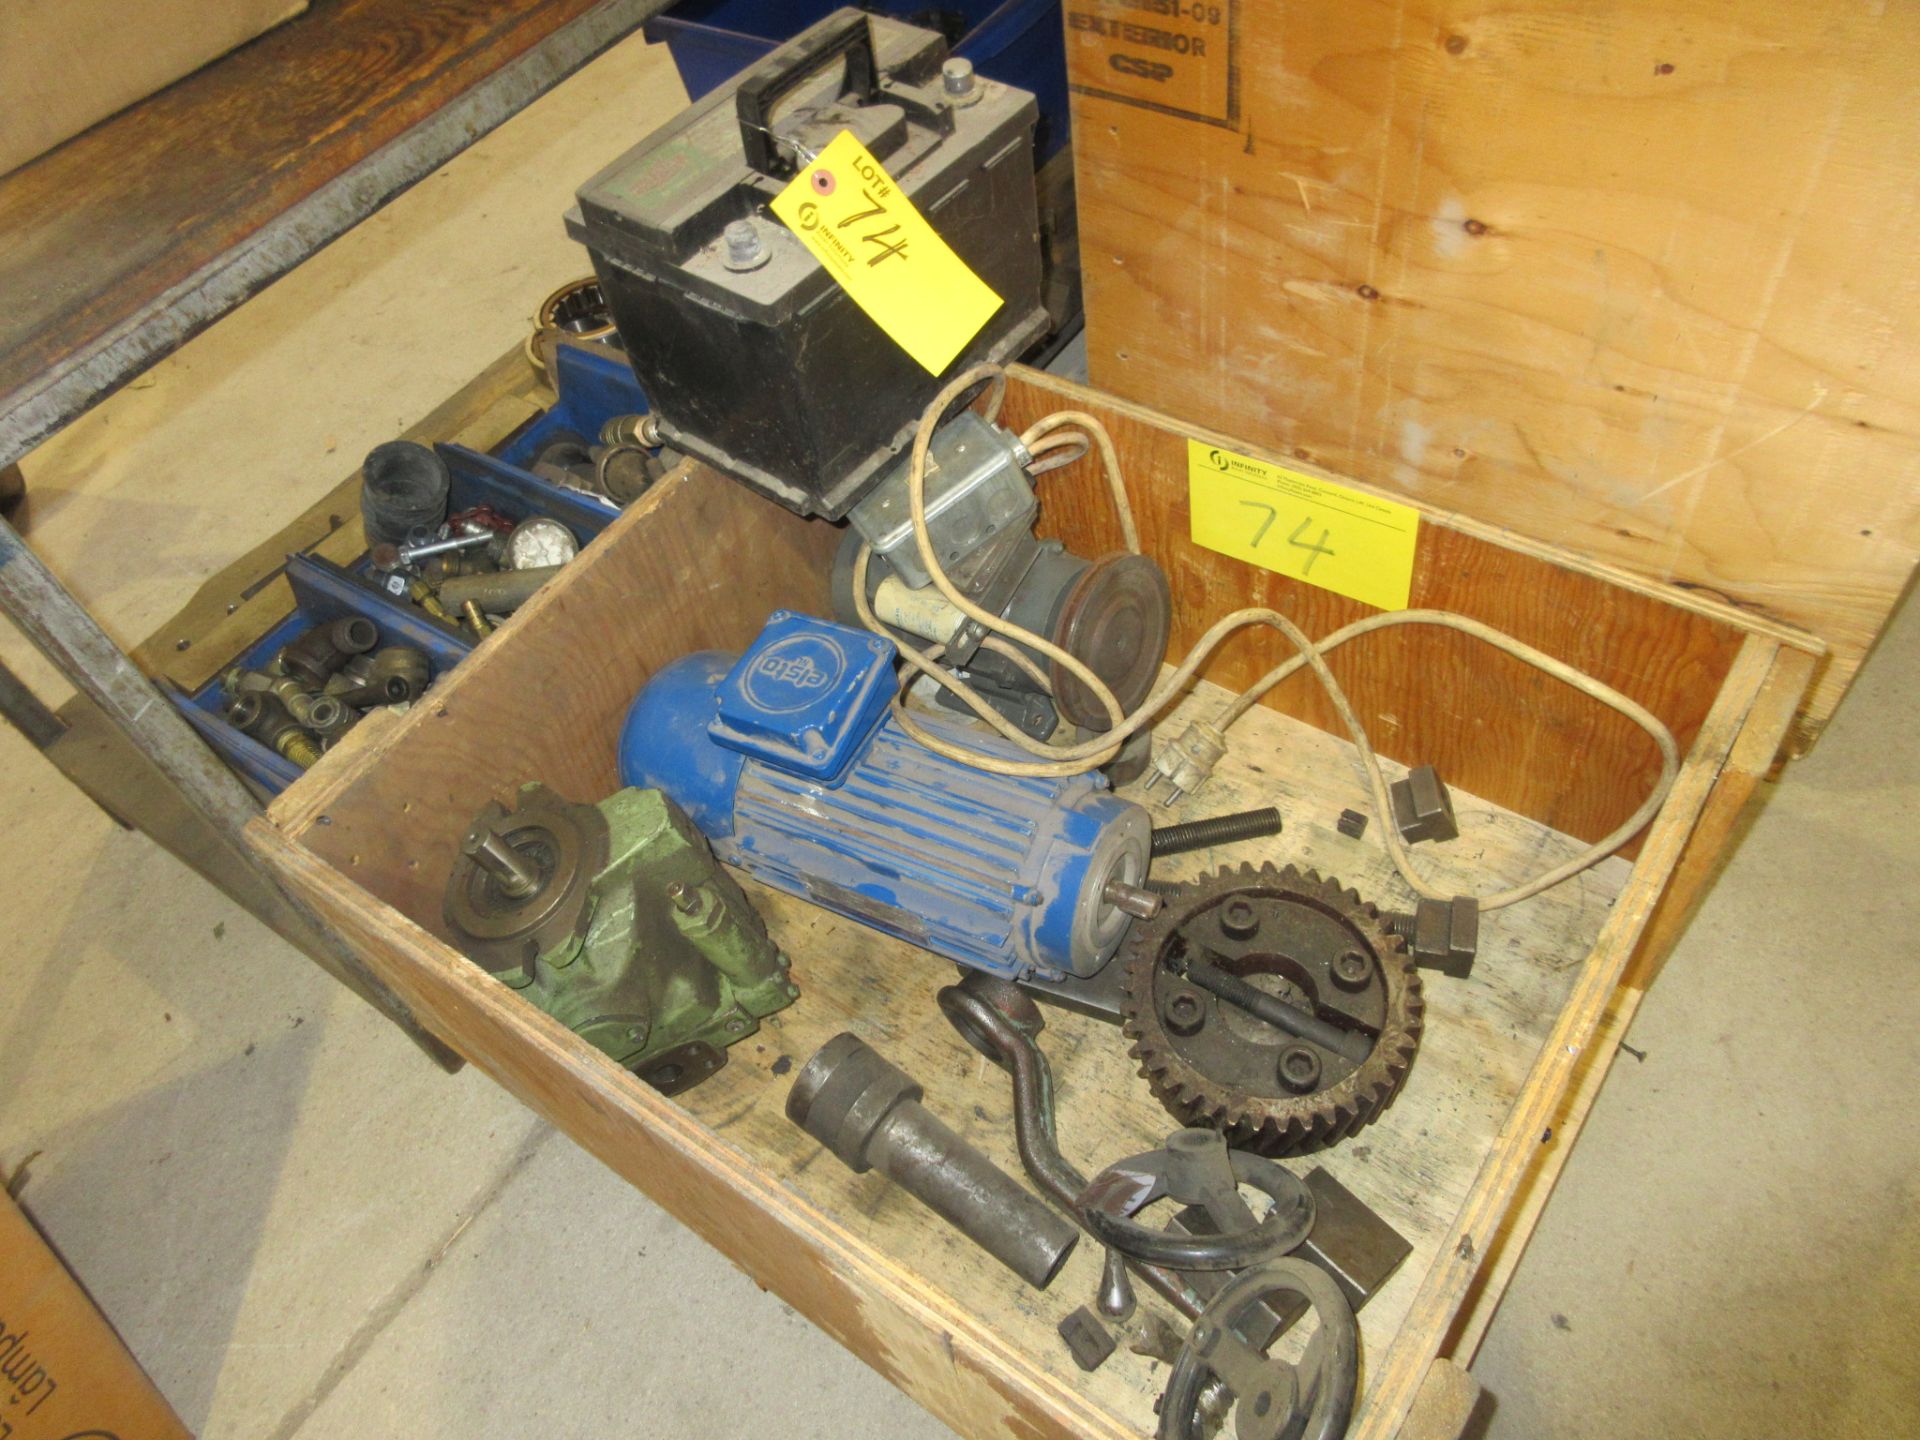 LOT OF (2) SHELVES CONTENTS INCLUDING BEARINGS, MACHINE SCREWS, ETC. AND CRATE W/ MOTOR - Image 6 of 6